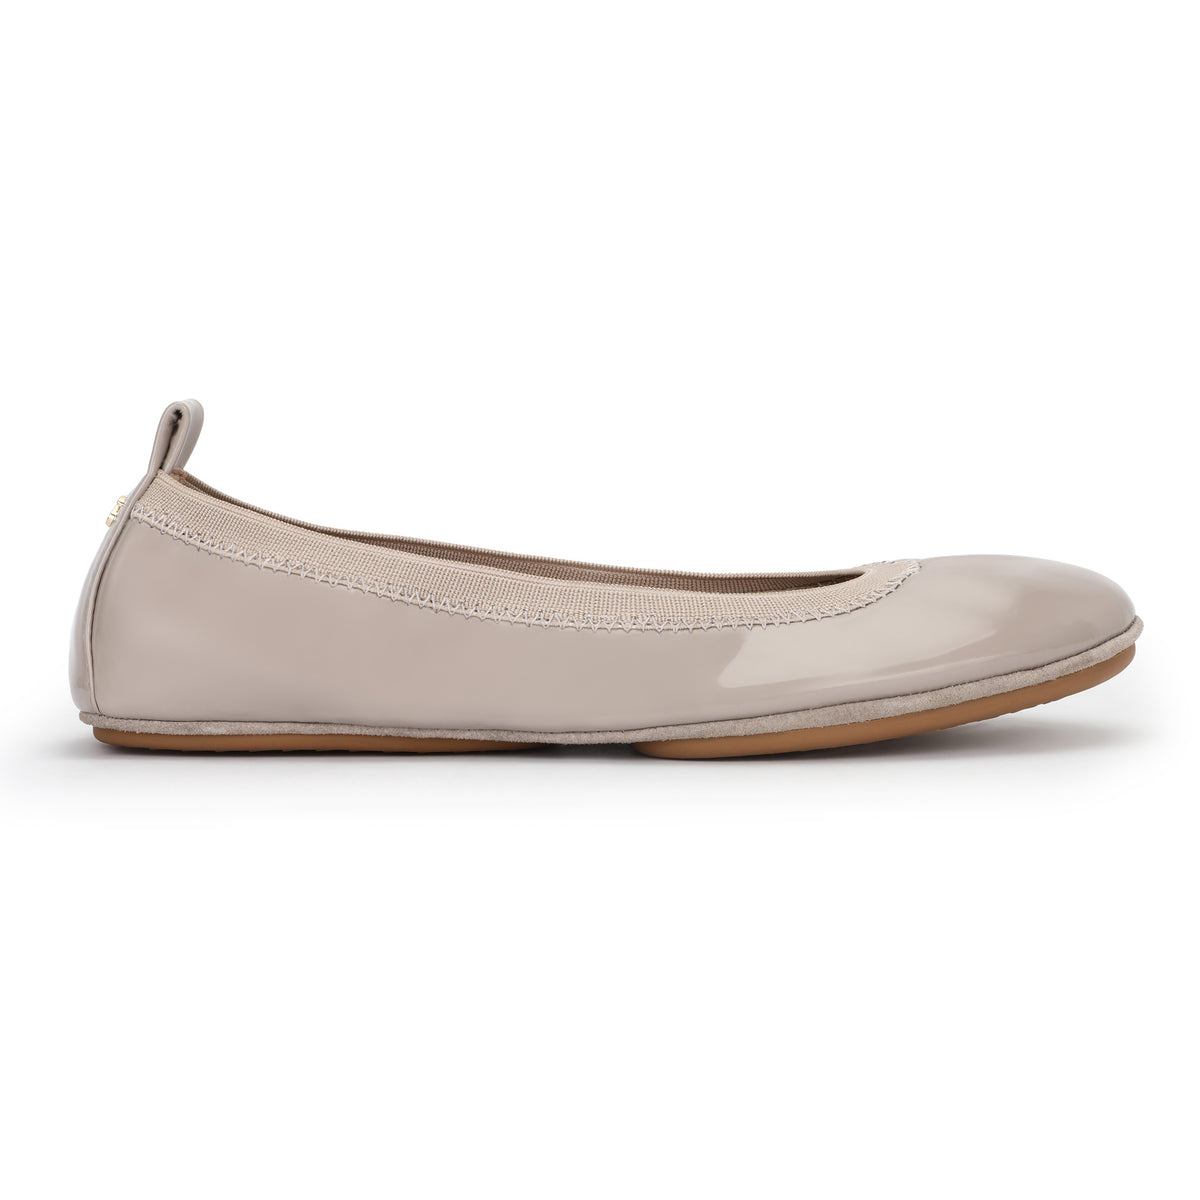 Samara Foldable Ballet Flat Taupe in Leather Simply